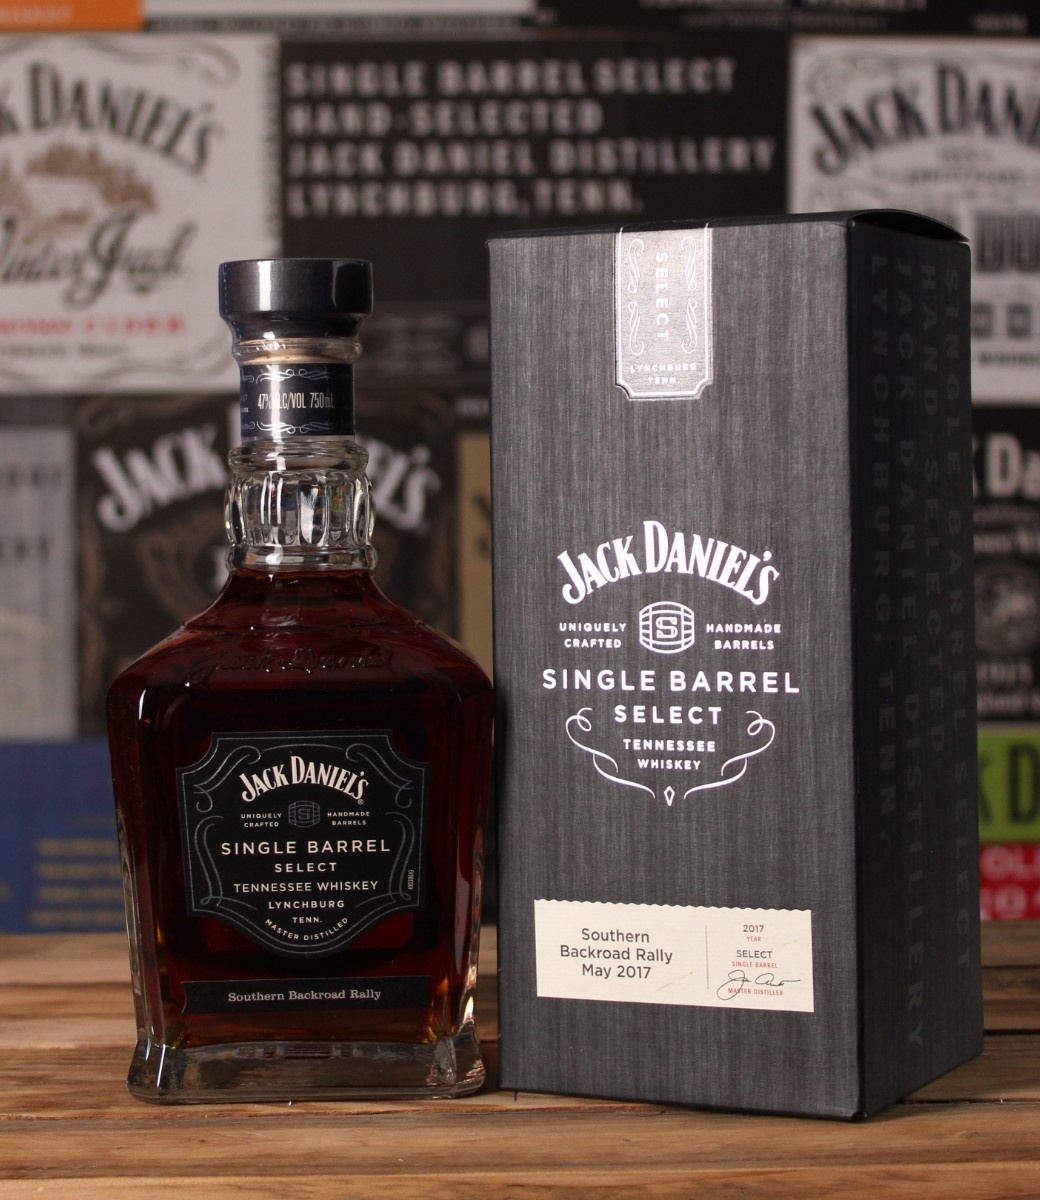 JACK DANIEL'S - Single Barrel - Personal Collection - Southern Backroad Rally United States - 3.14.17